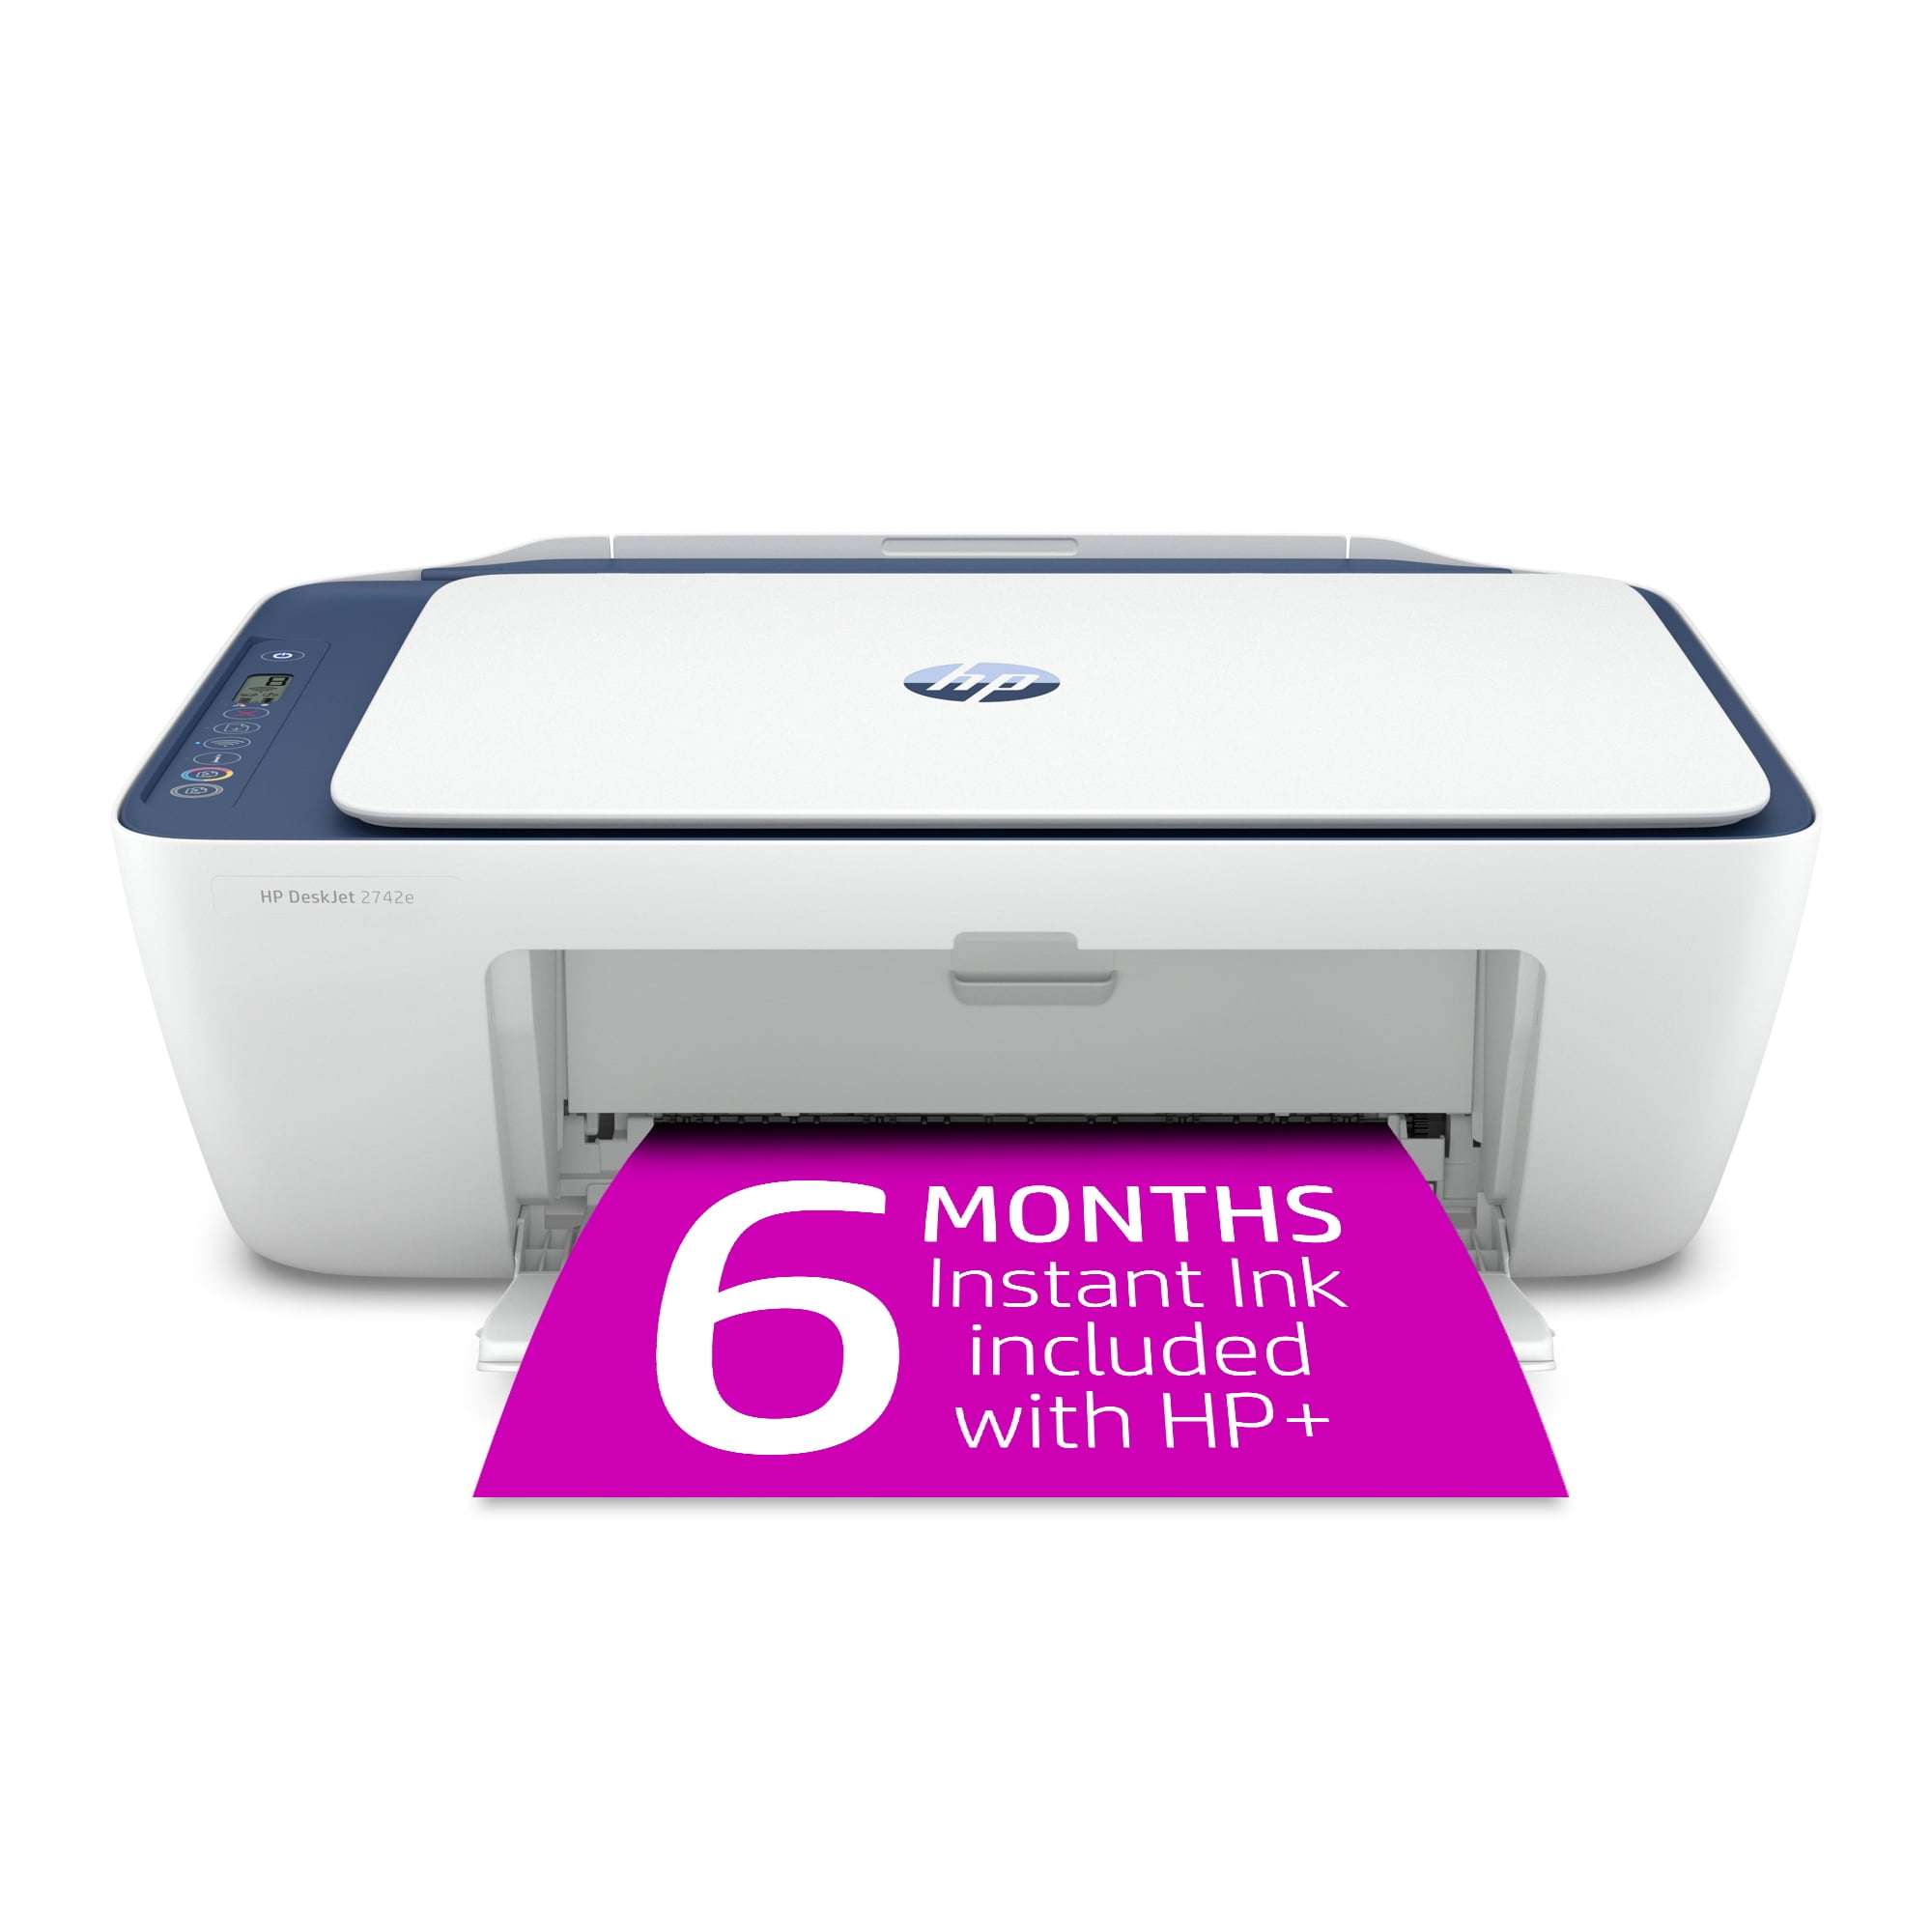 HP DeskJet 2742e All-in-One Wireless Color Inkjet Steel) with 6 Months Instant Ink Included with HP+ - Walmart.com